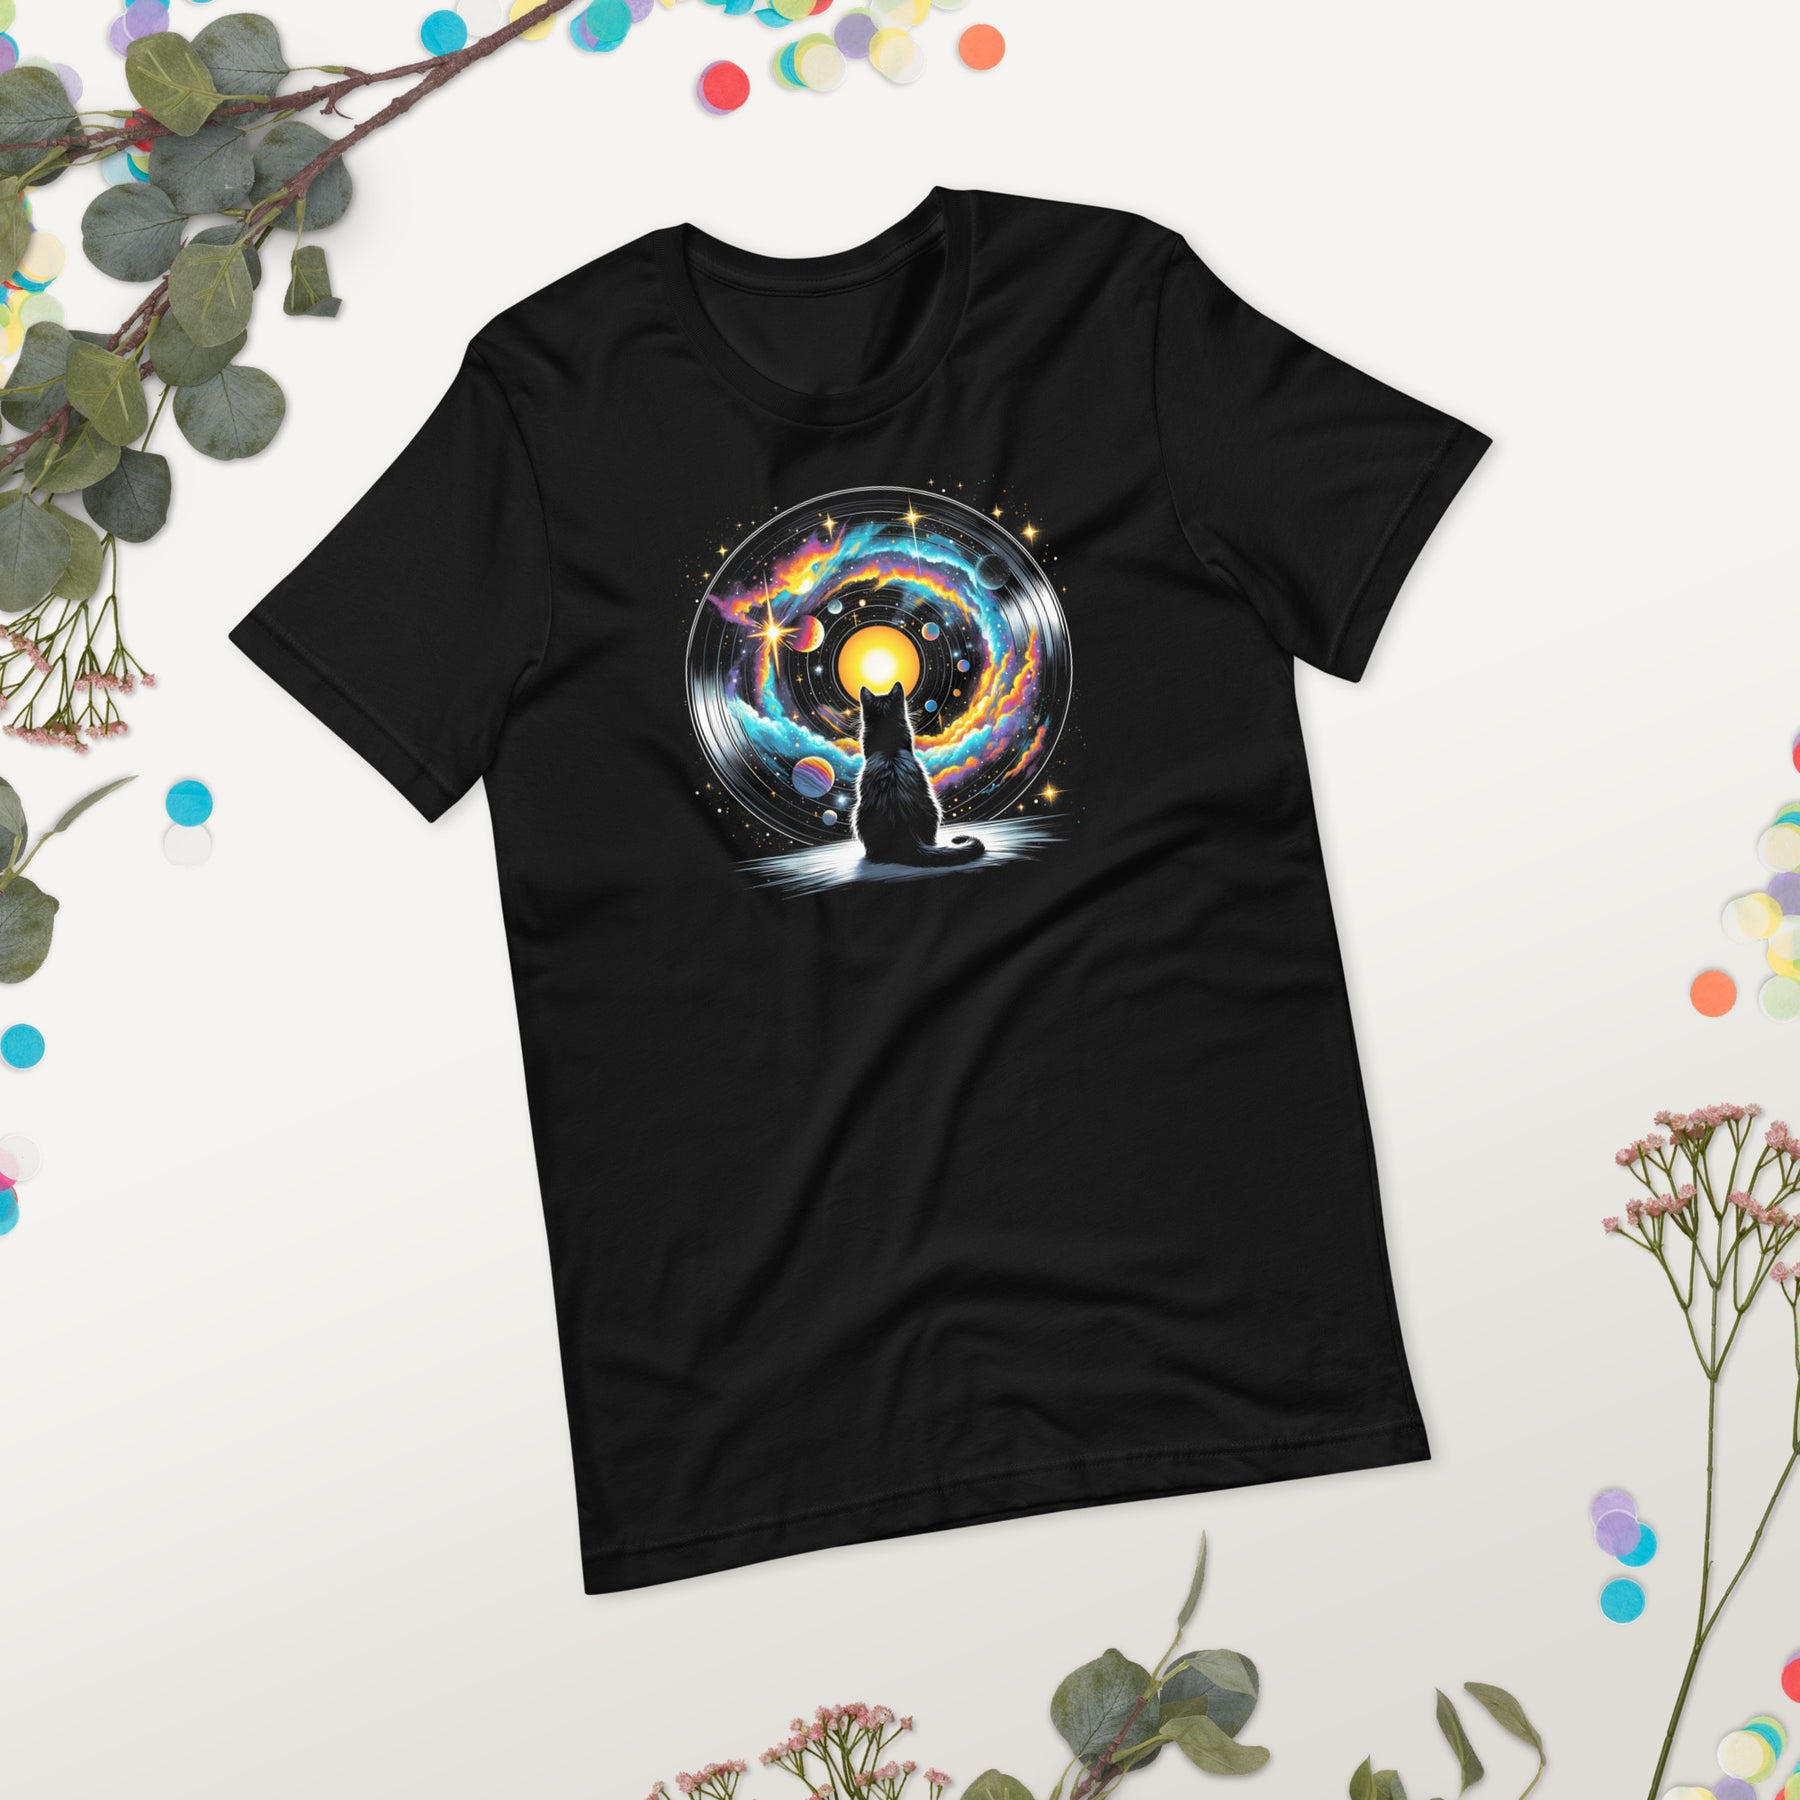 Space Cat Shirt, Cool Outer Space Galaxy Kitty Tee for Cat Lovers, Sci-Fi Solar System T-Shirt, Perfect Gift for Galaxy Enthusiasts